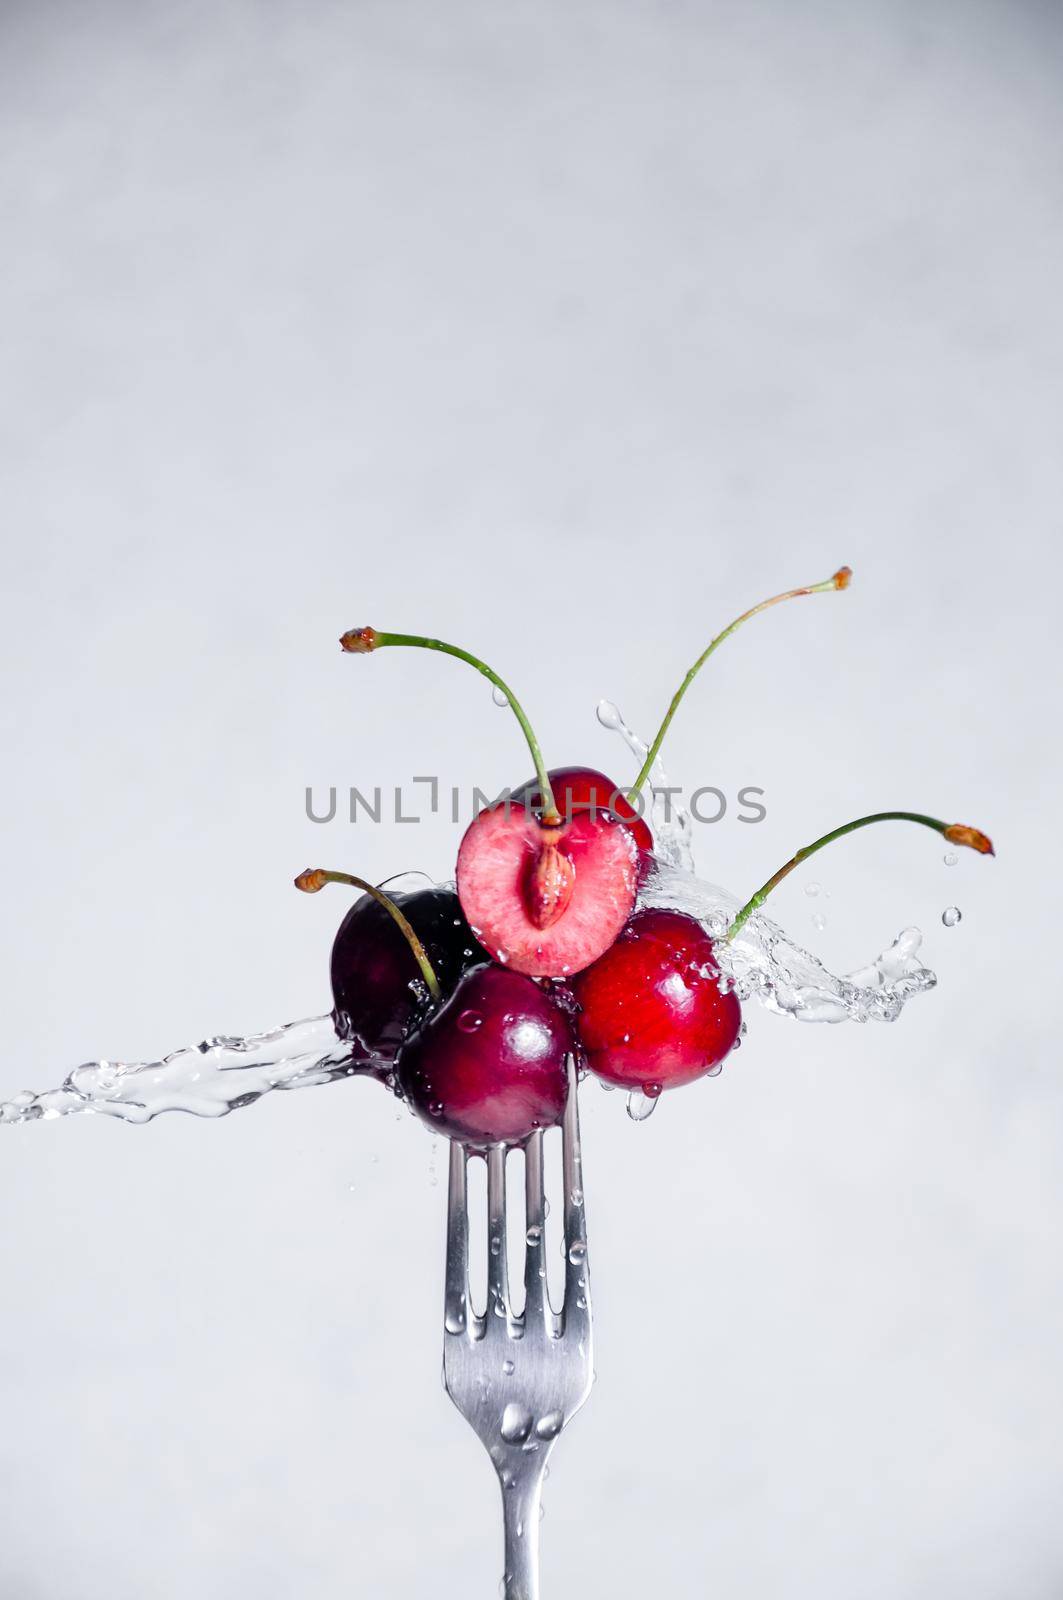 Close up Composition of Cherries on Fork Flying in the air with Water Splashes on the Light Grey Background by Svetlana_Belozerova